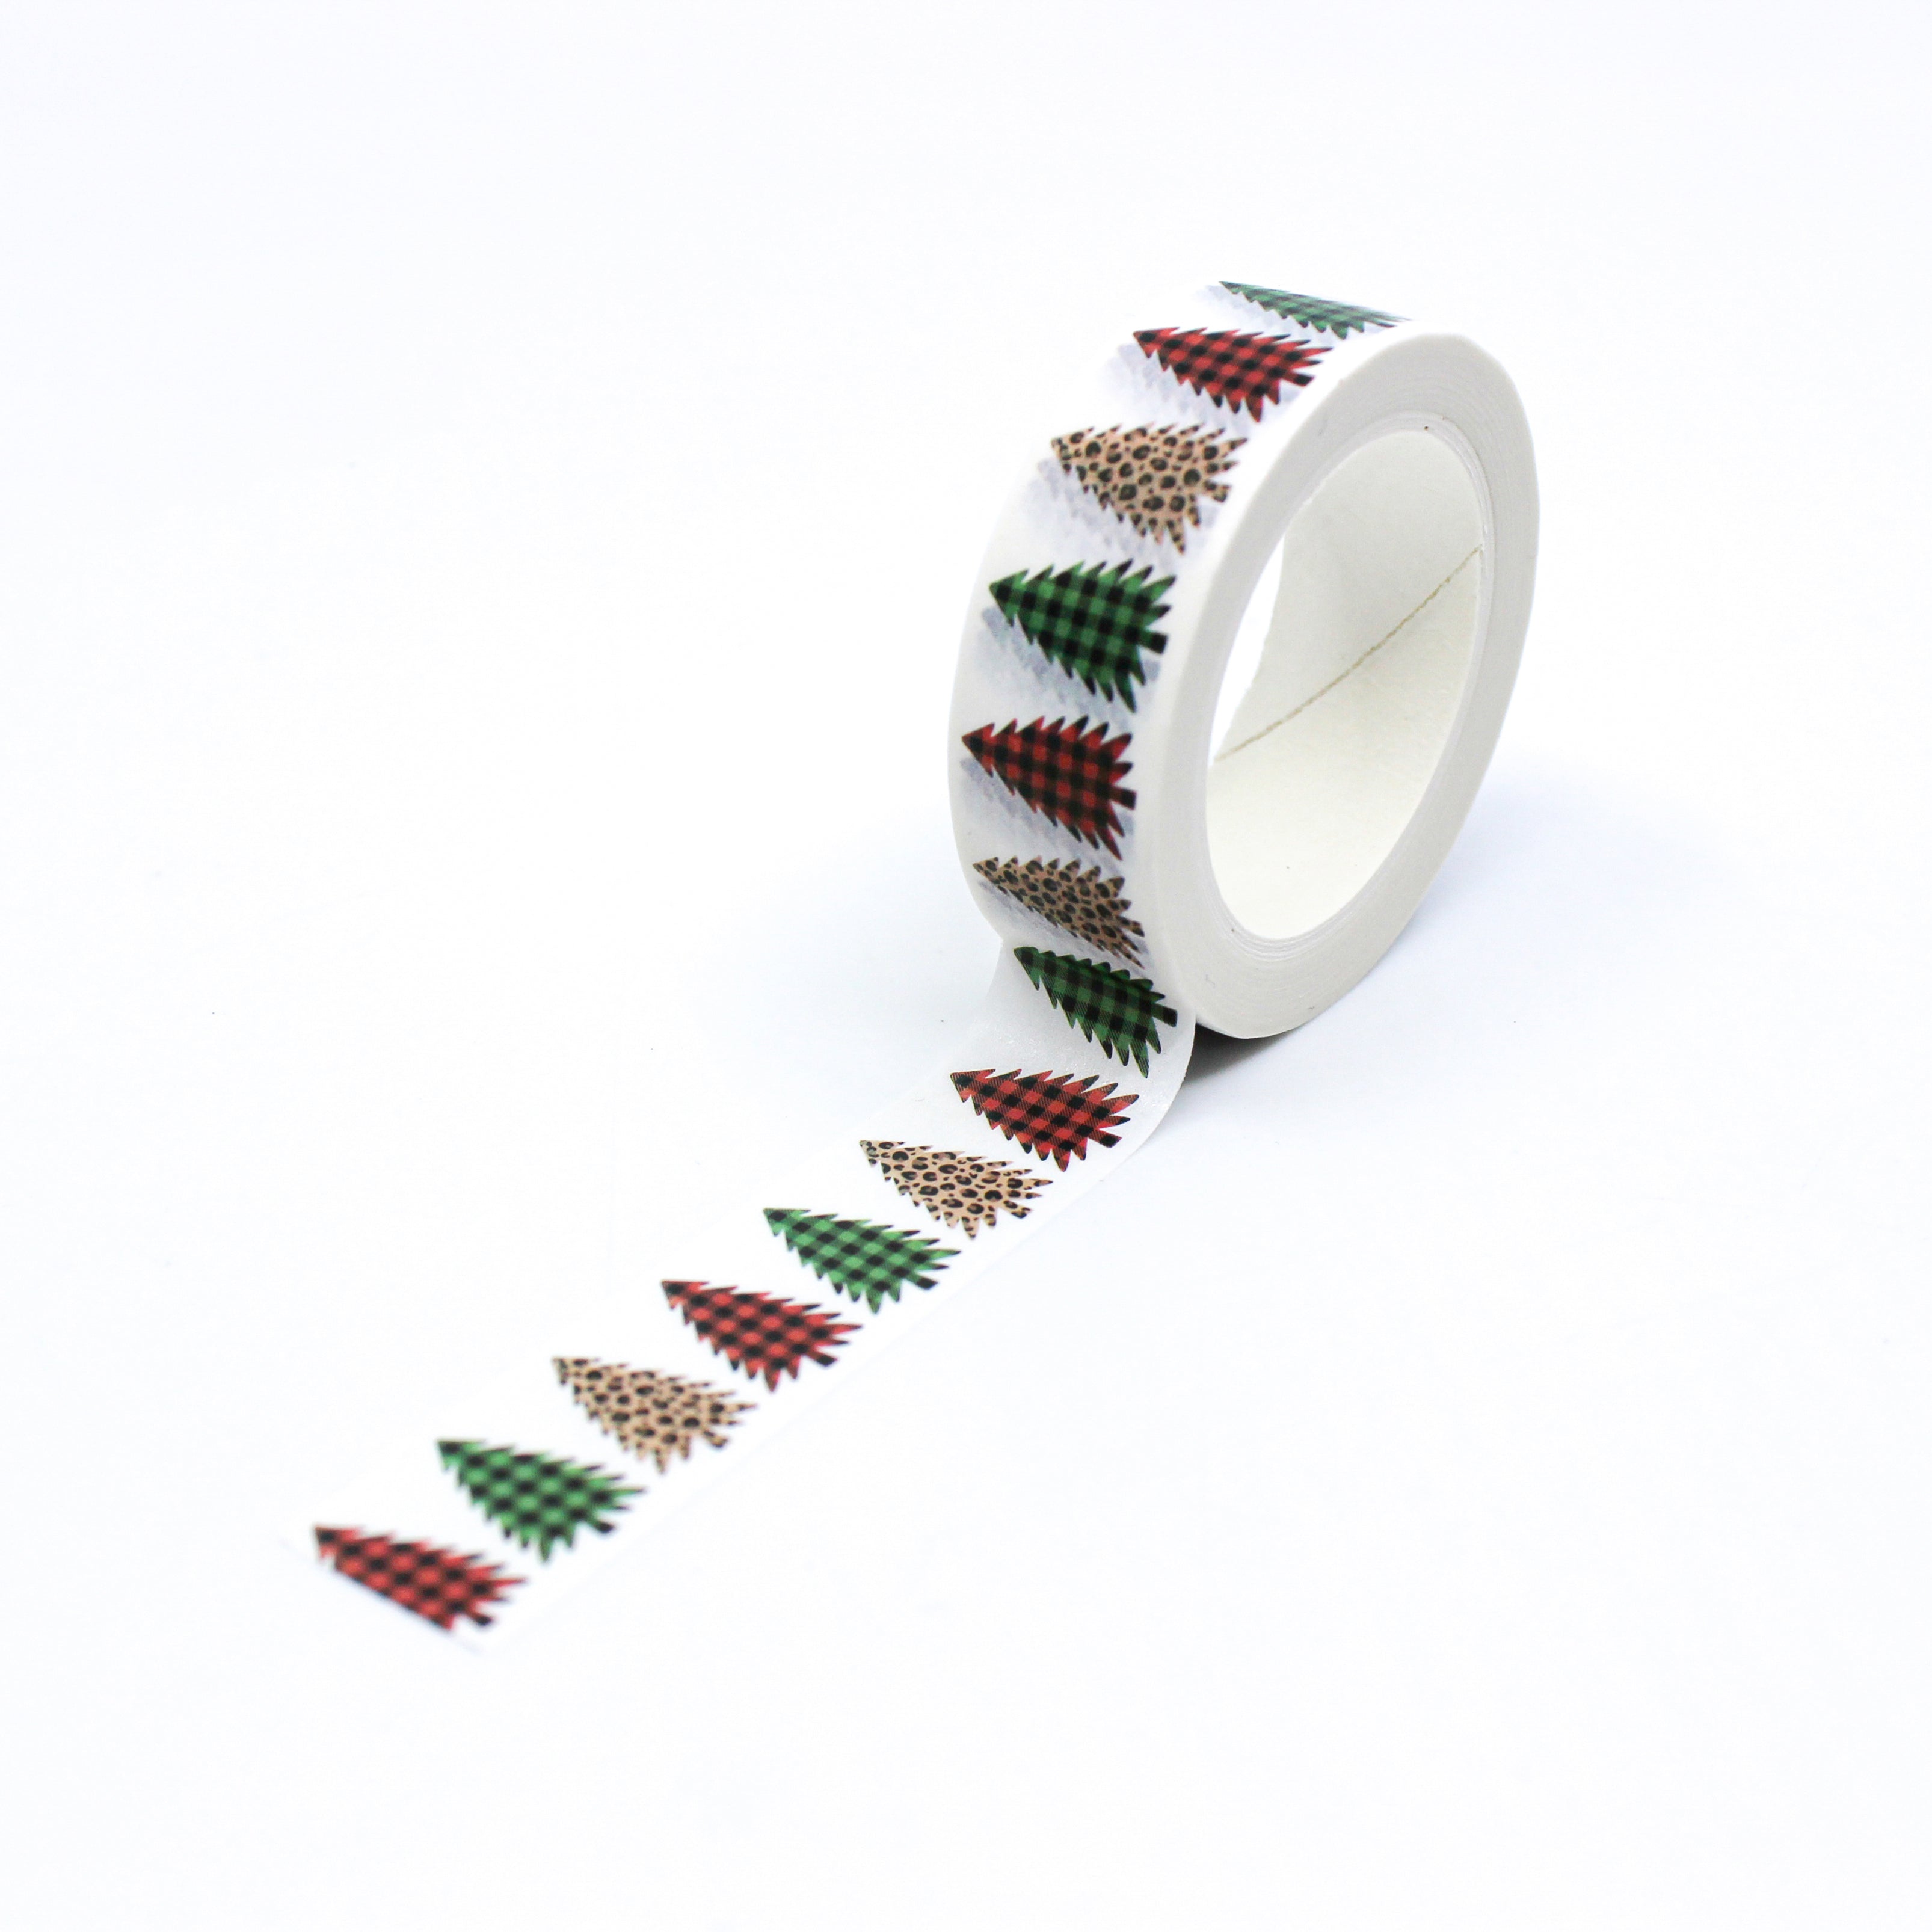  Modern Animal Print and Cute Plaid Christmas Tree Washi Tape from BBB Supplies Craft Shop.